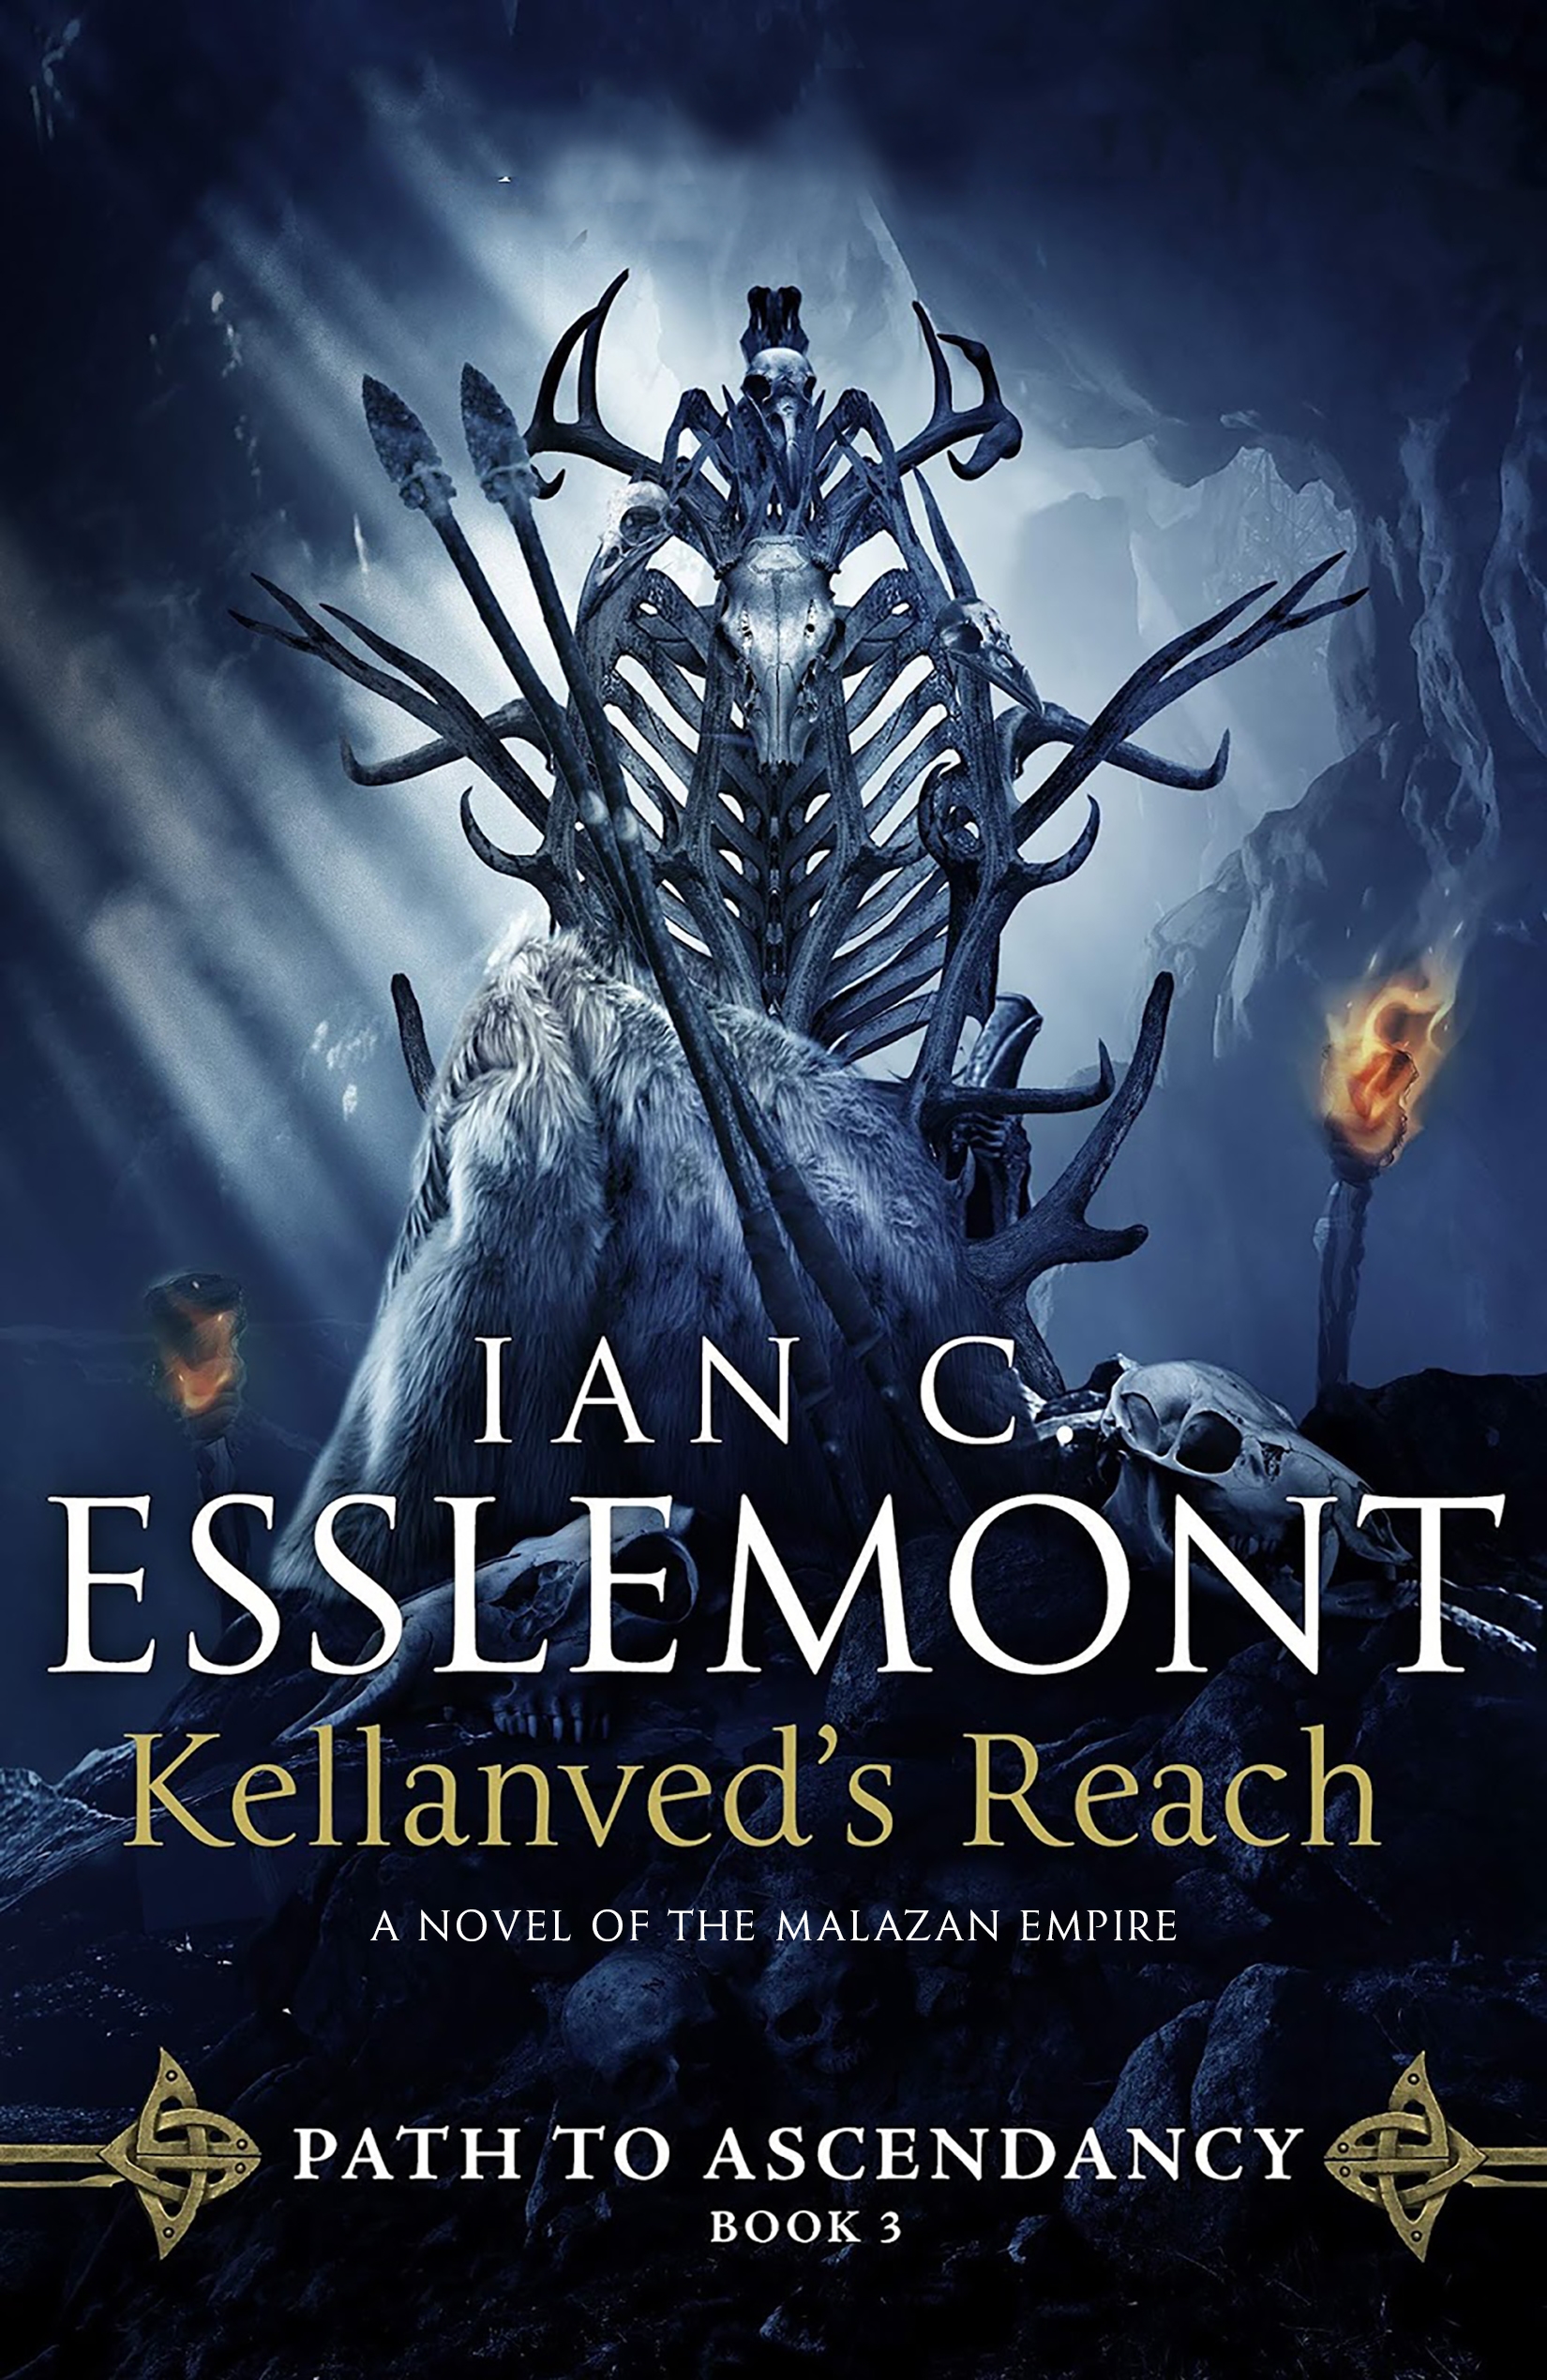 Kellanved's Reach : Path to Ascendancy, Book 3 (A Novel of the Malazan Empire) by Ian C. Esslemont